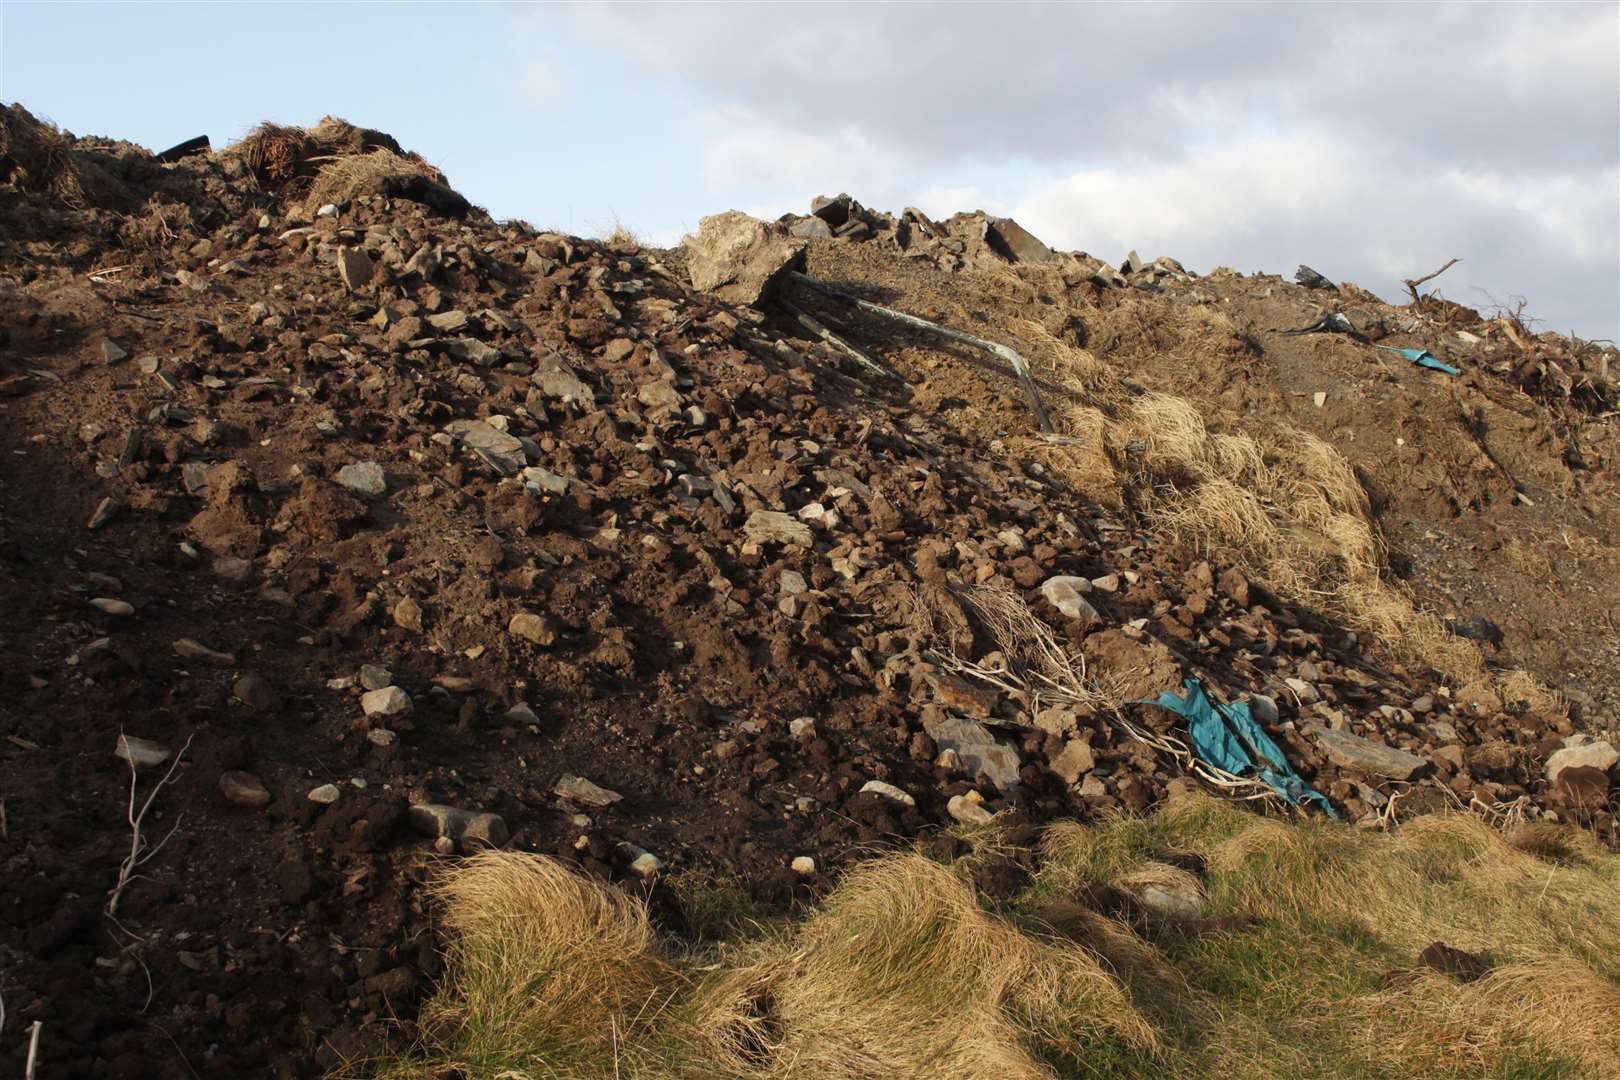 Waste is scattered down a slope just below the South Head footpath.